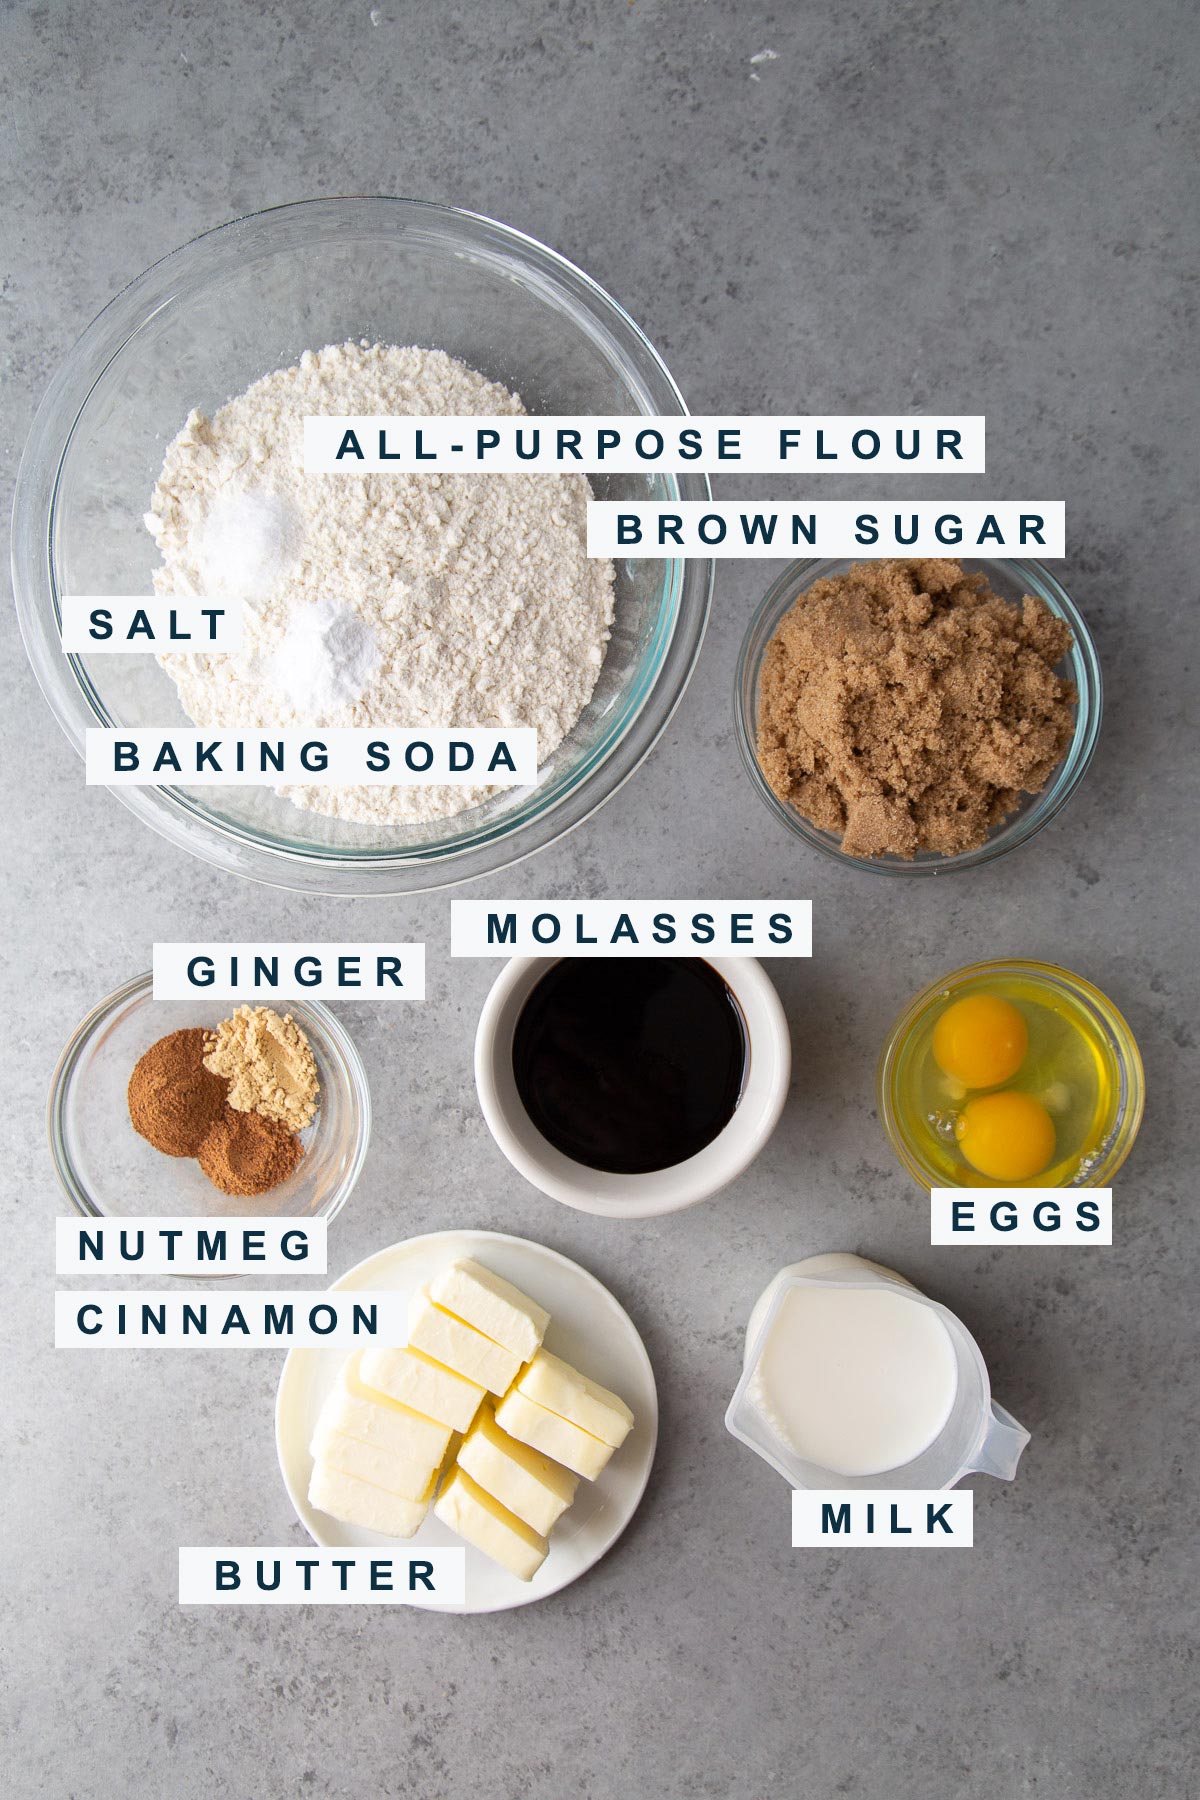 ingredients needed for gingerbread layer cake include molasses, brown sugar, spices, and butter.